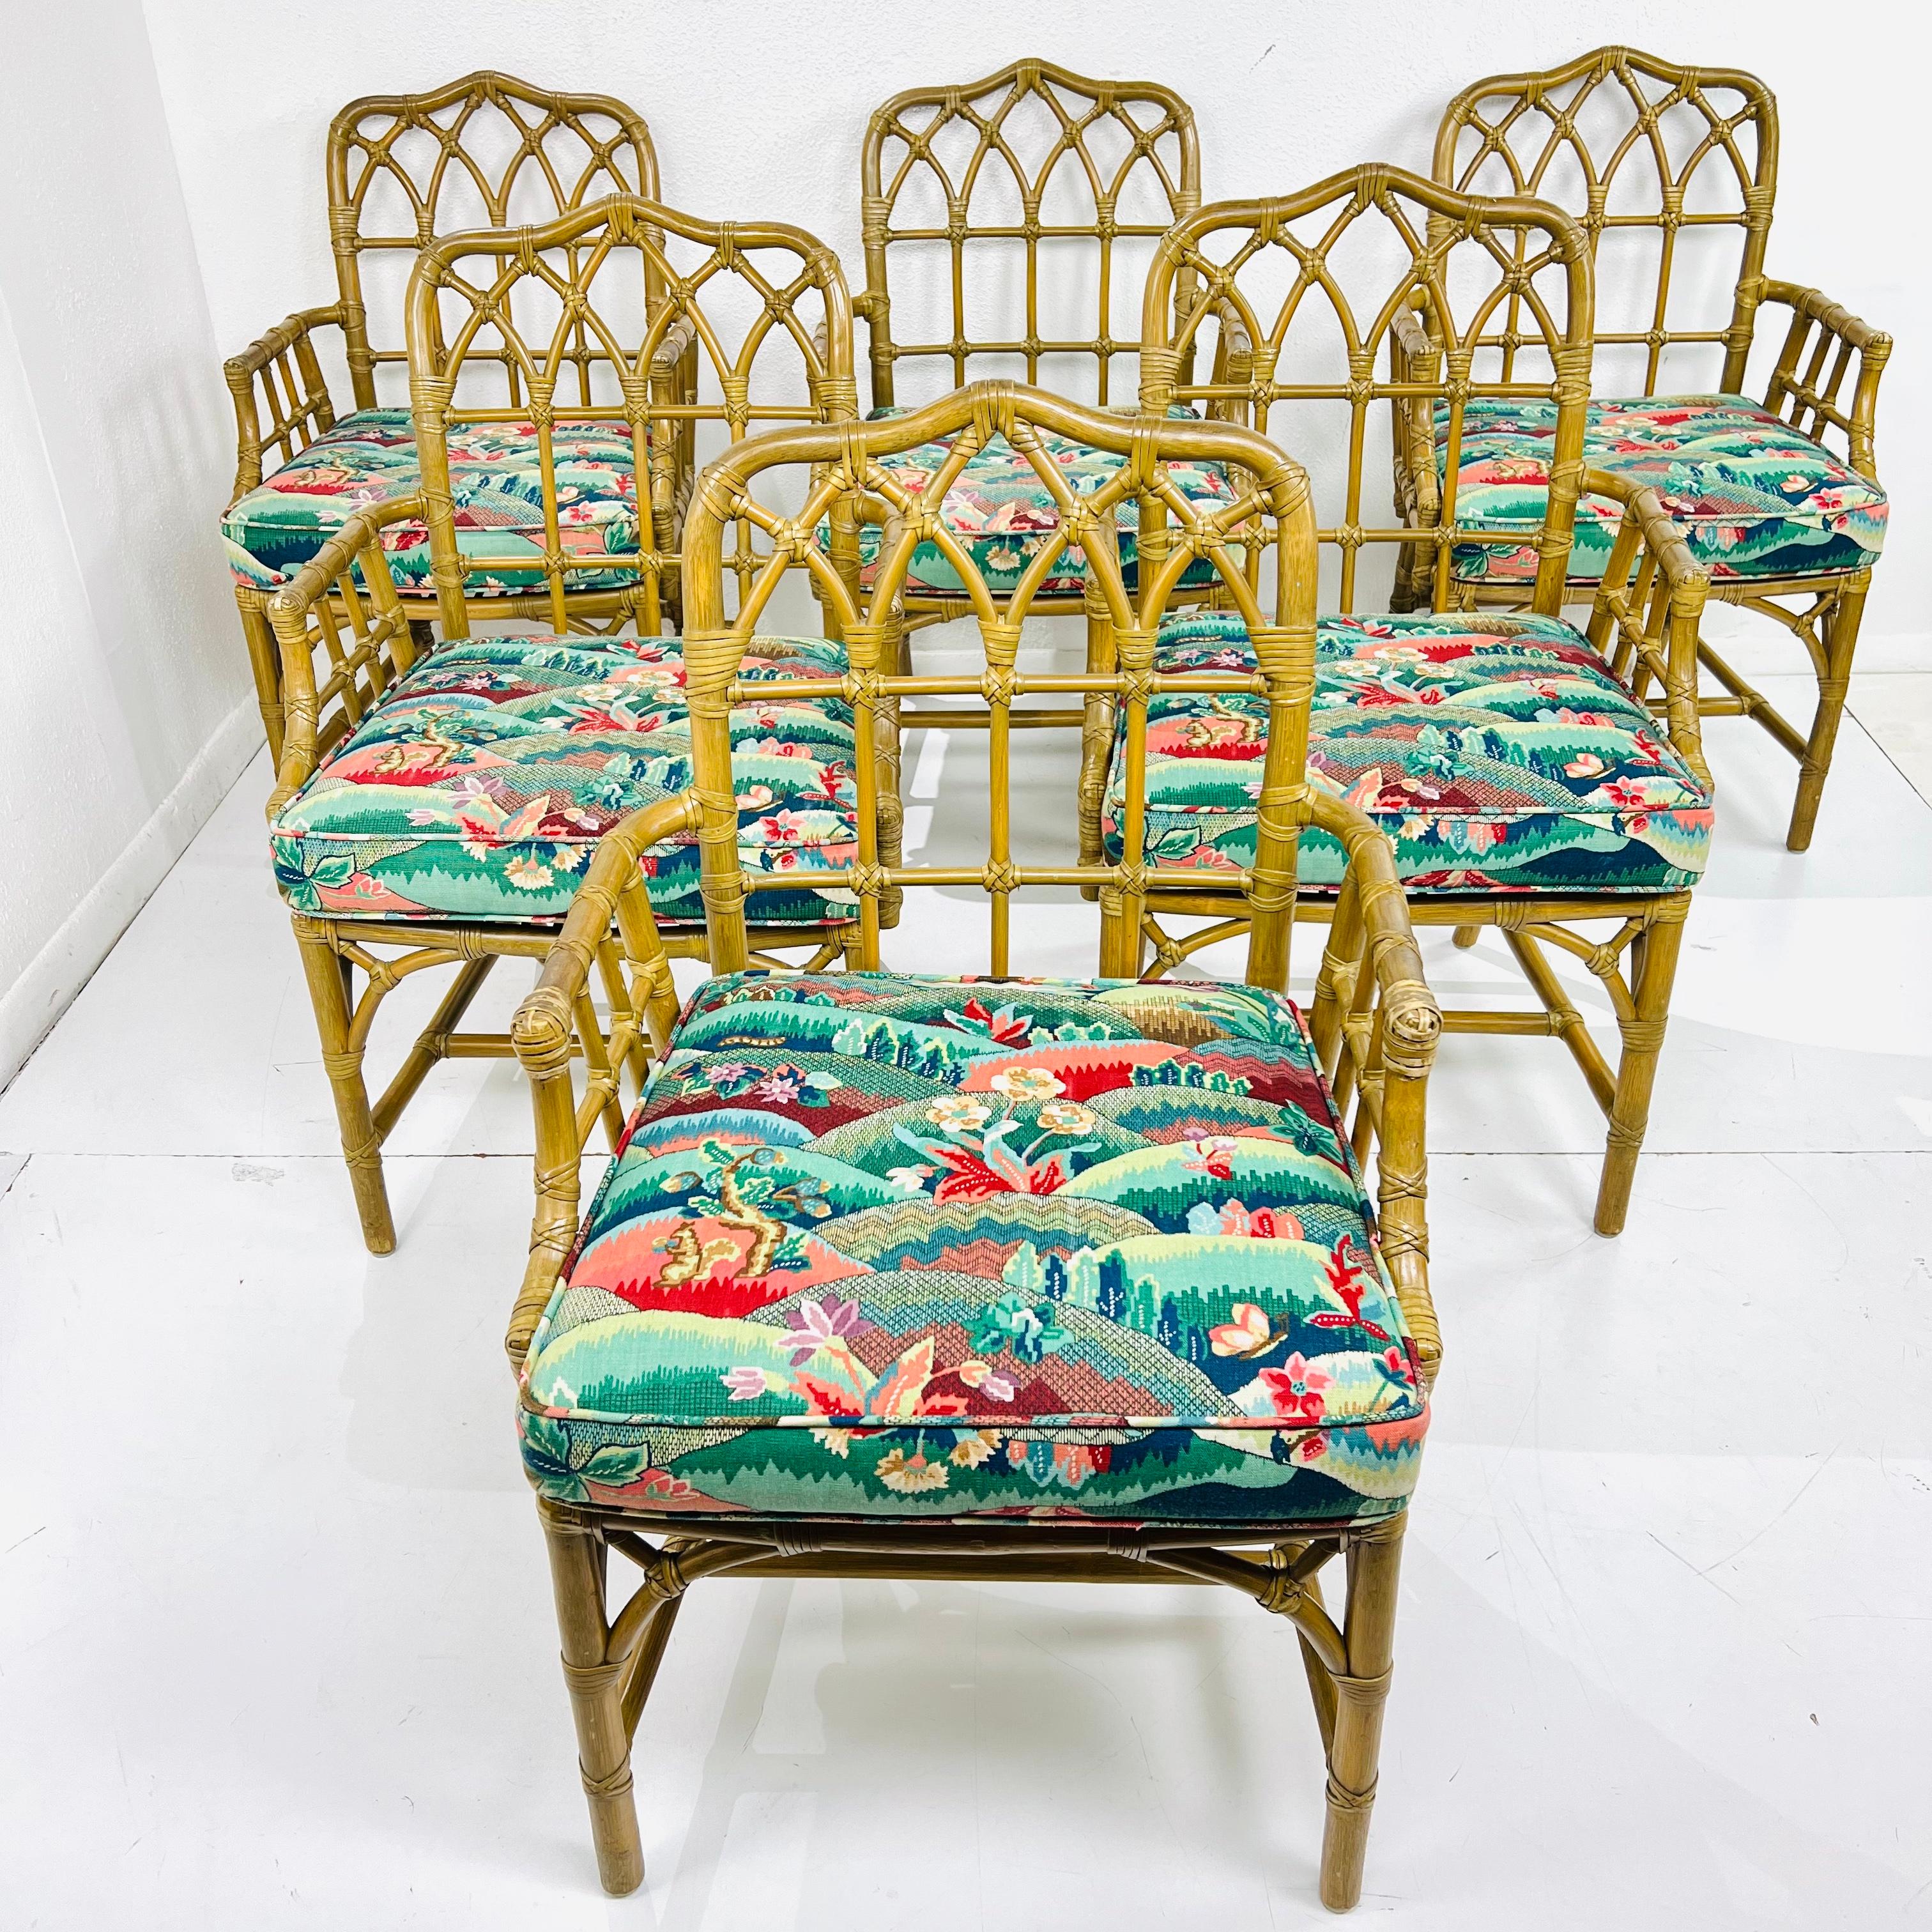 Fantastic set of 6 McGuire rattan dining chairs in the original finish, with rawhide laces and recently upholstered cushions. The set includes six armchairs and each chair has the McGuire plate and iconic pearl M. Beautiful patina for the perfect